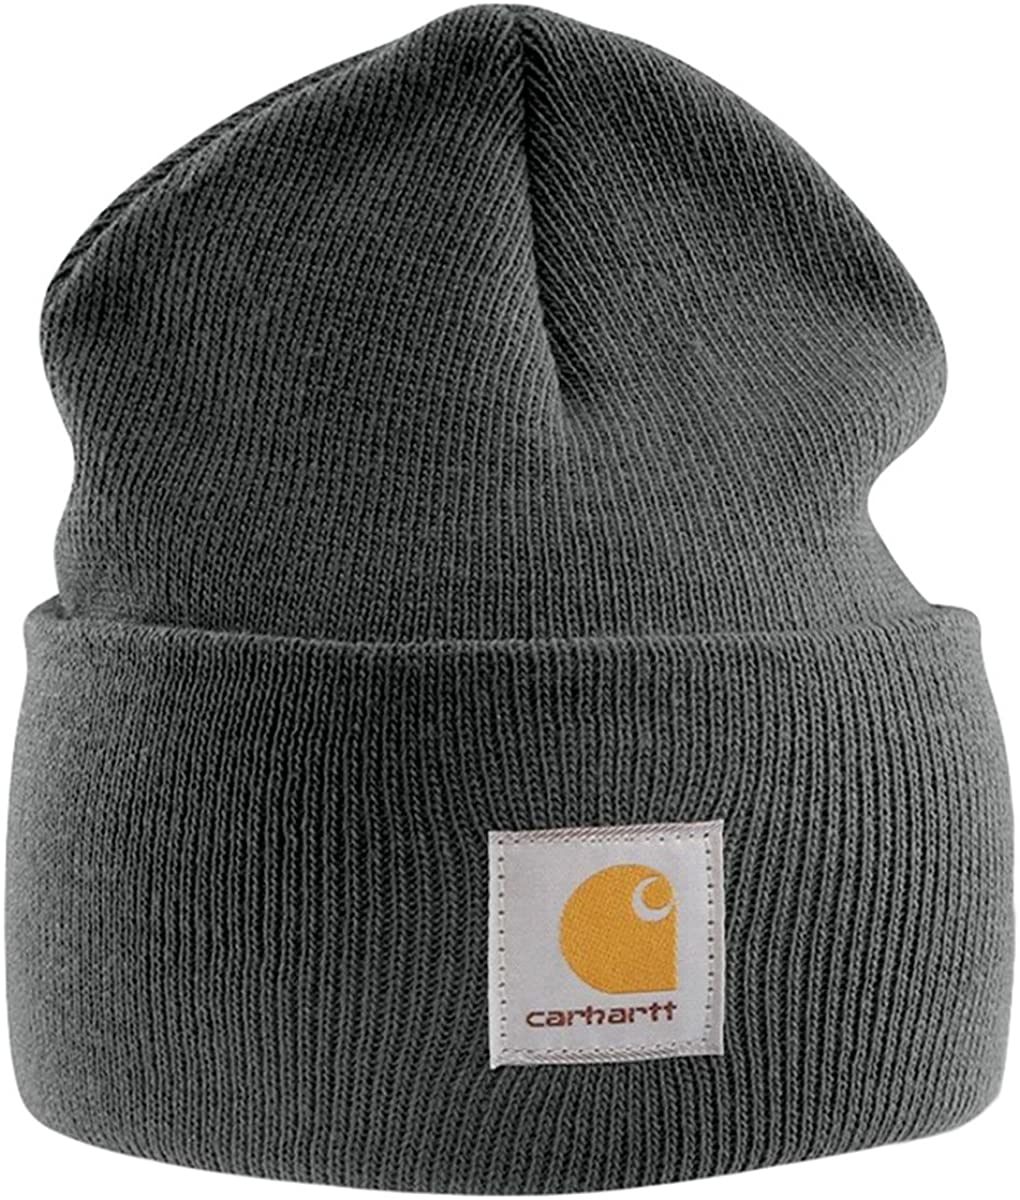 Details about   Dissizit Grey Or Black Knit Skull Cap Acrylic Winter Snowboarding Beanie Hat 